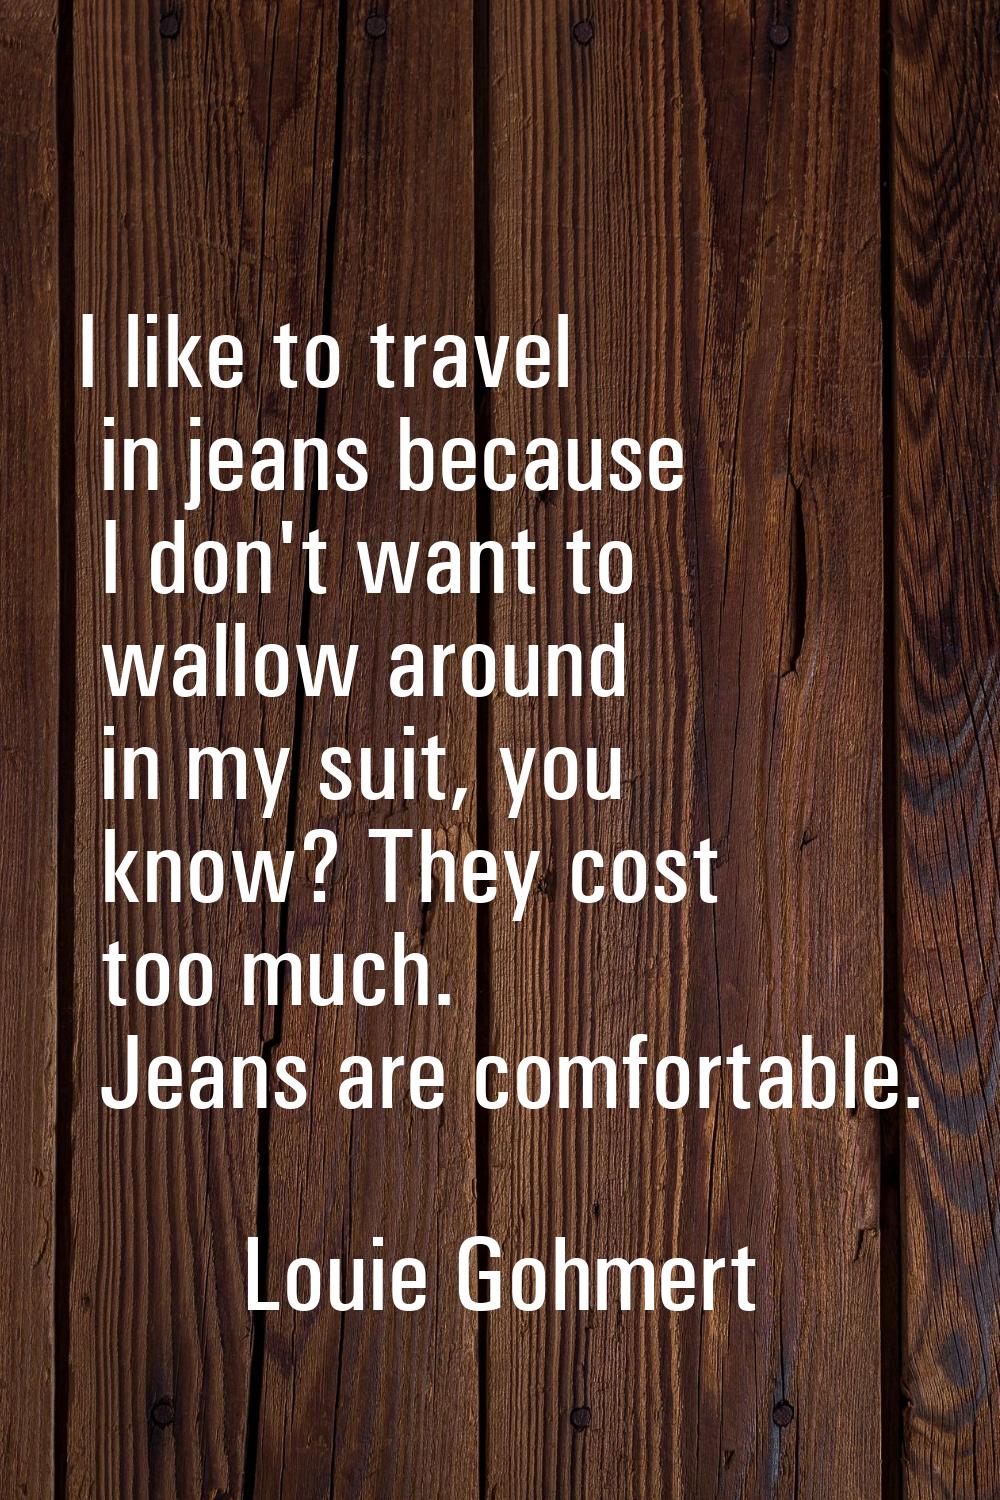 I like to travel in jeans because I don't want to wallow around in my suit, you know? They cost too